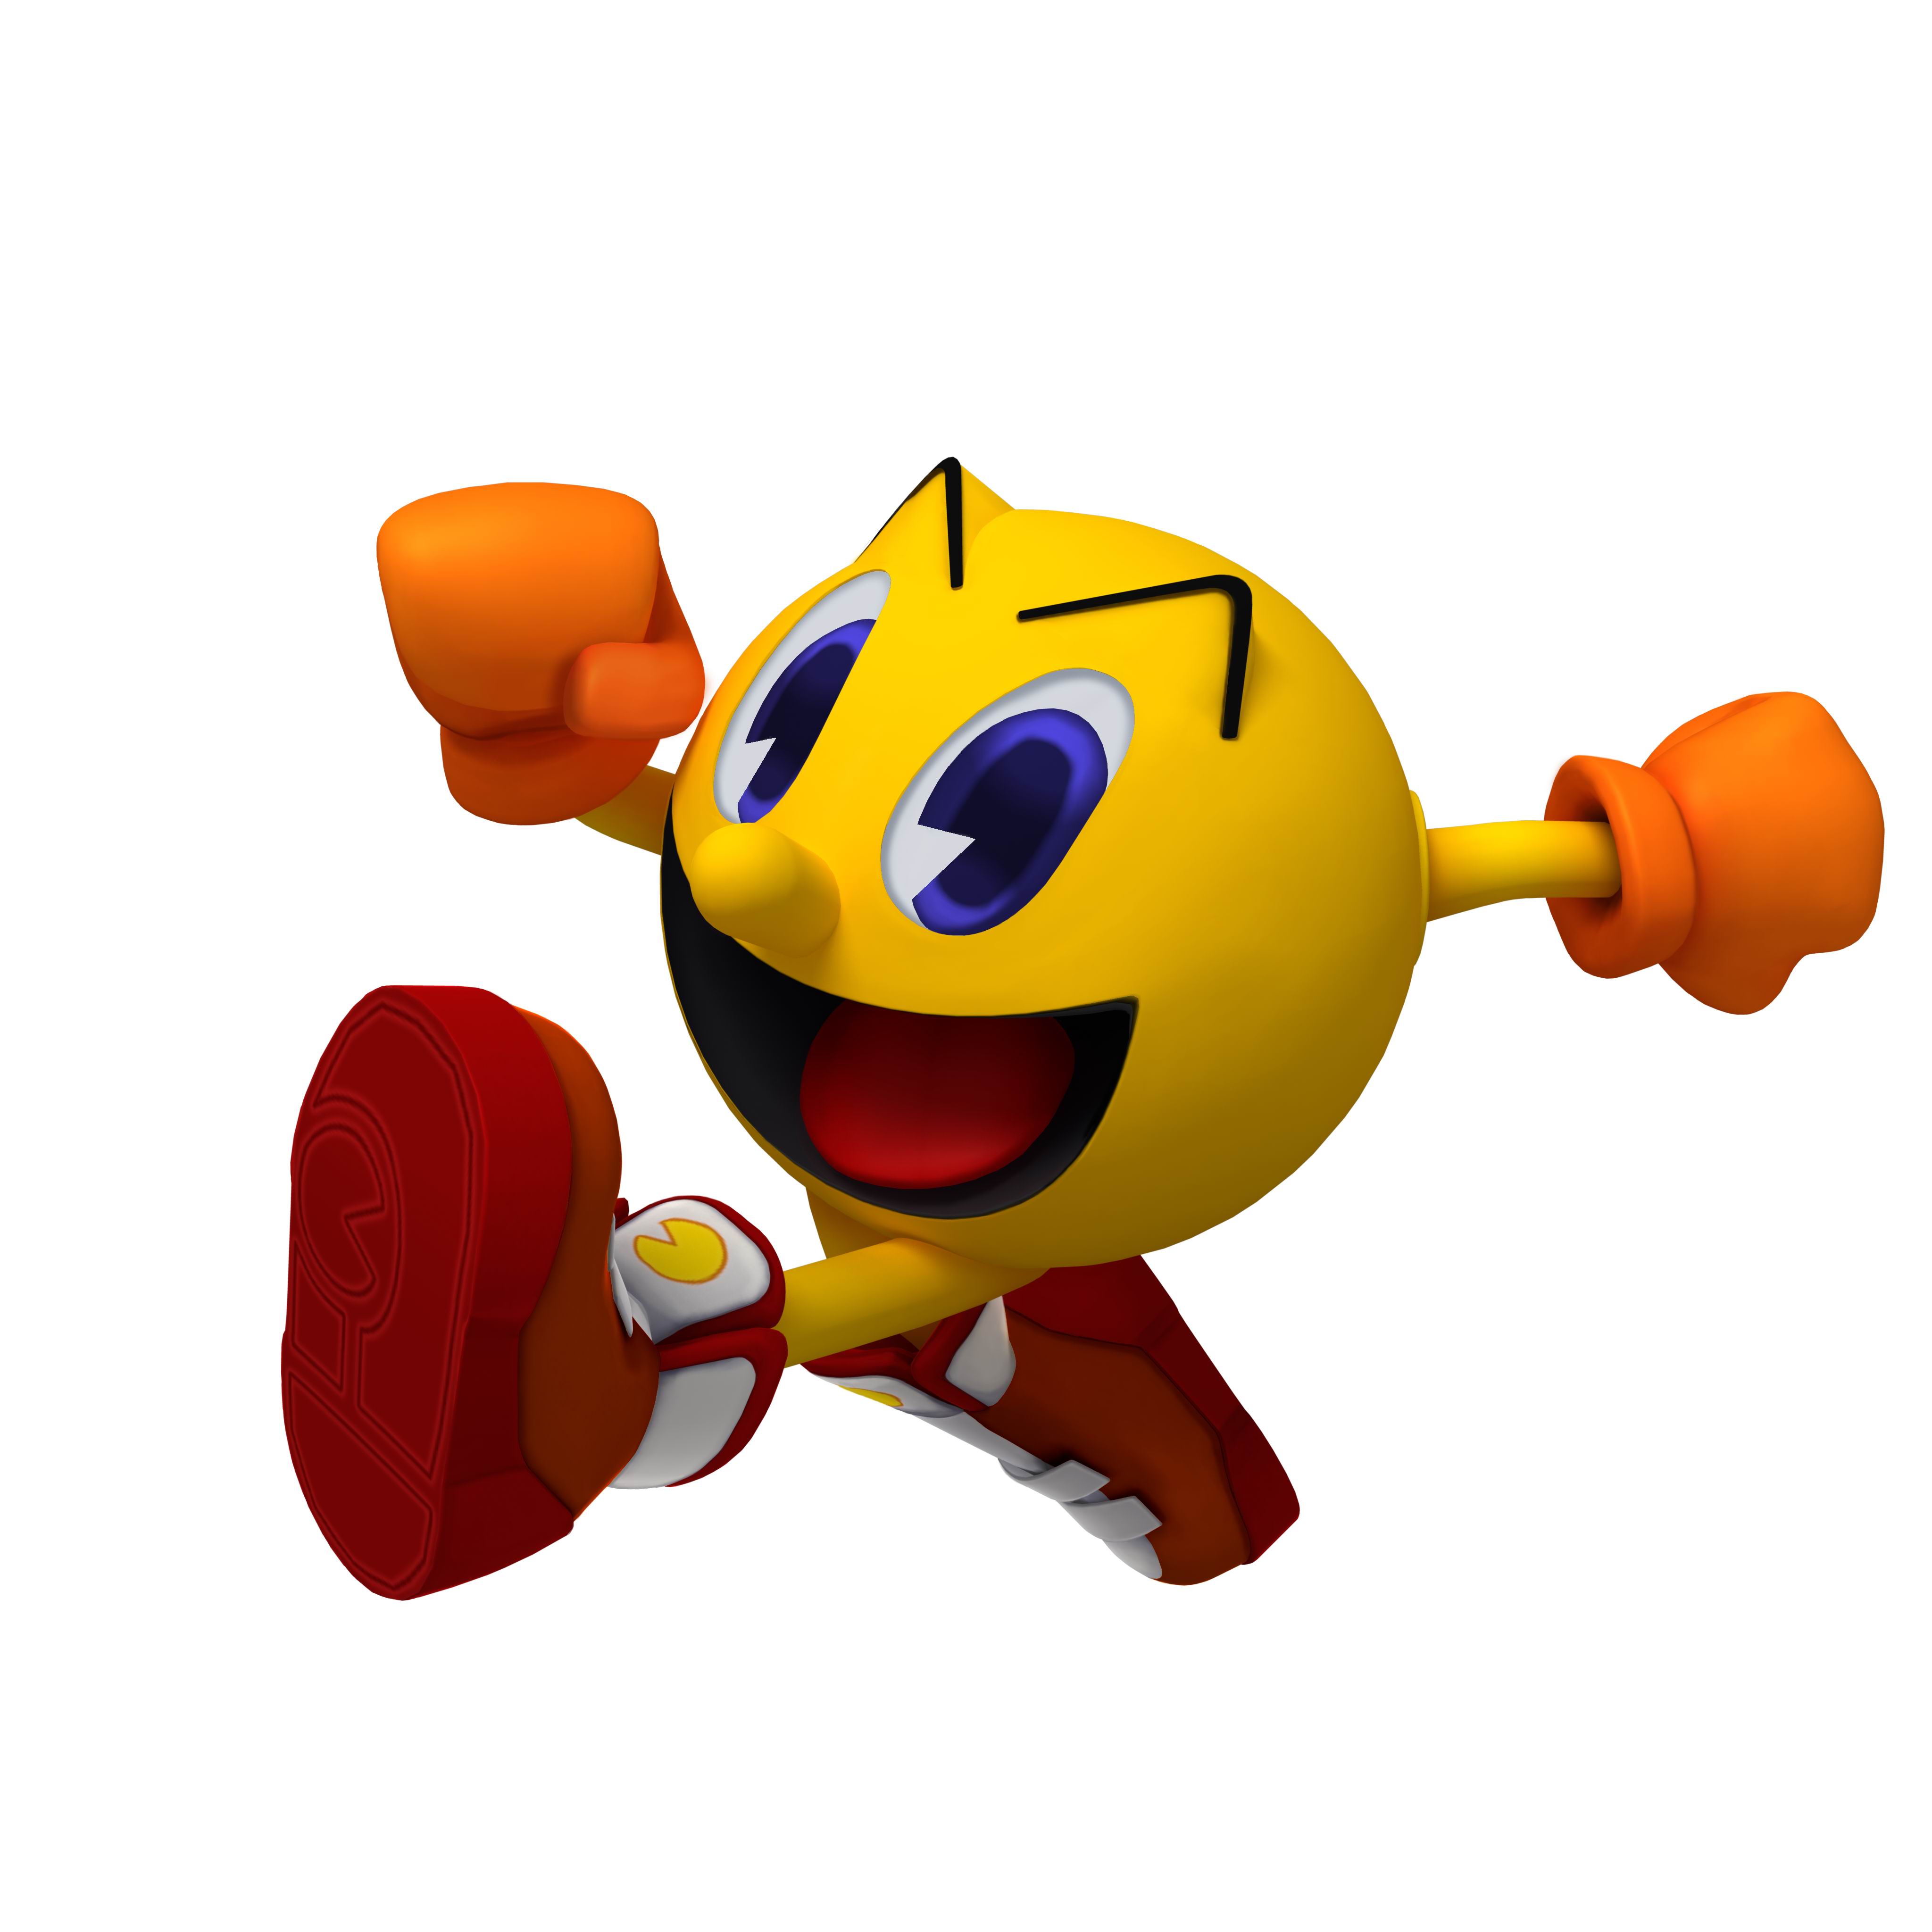 pac man joins the fight in super smash bros spawnfirst spawnfirst